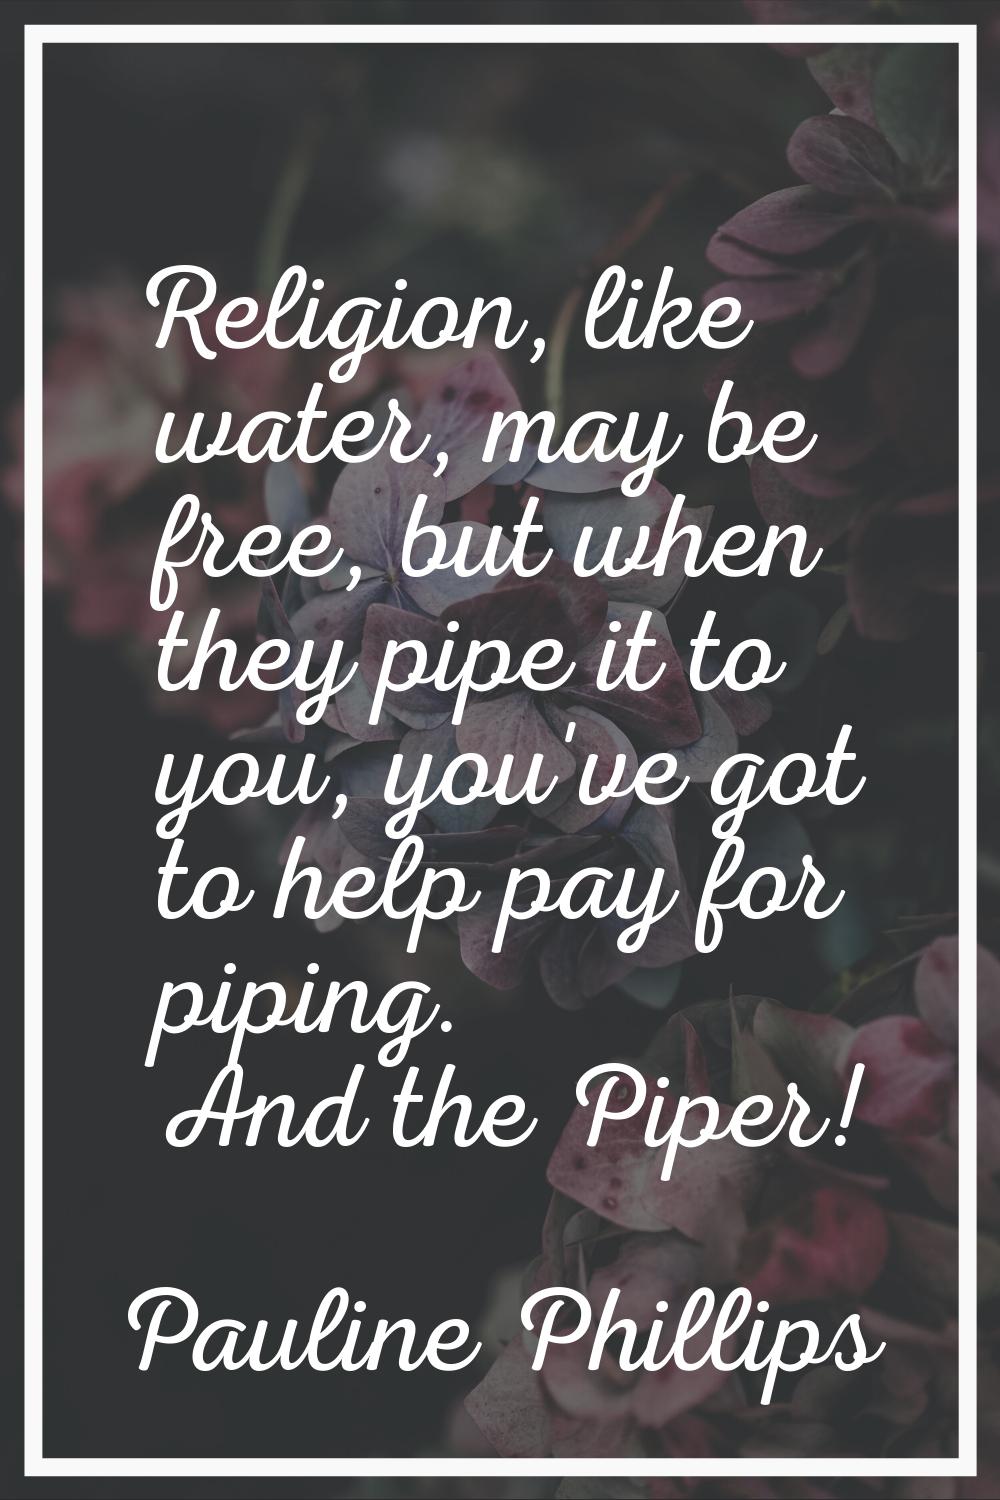 Religion, like water, may be free, but when they pipe it to you, you've got to help pay for piping.